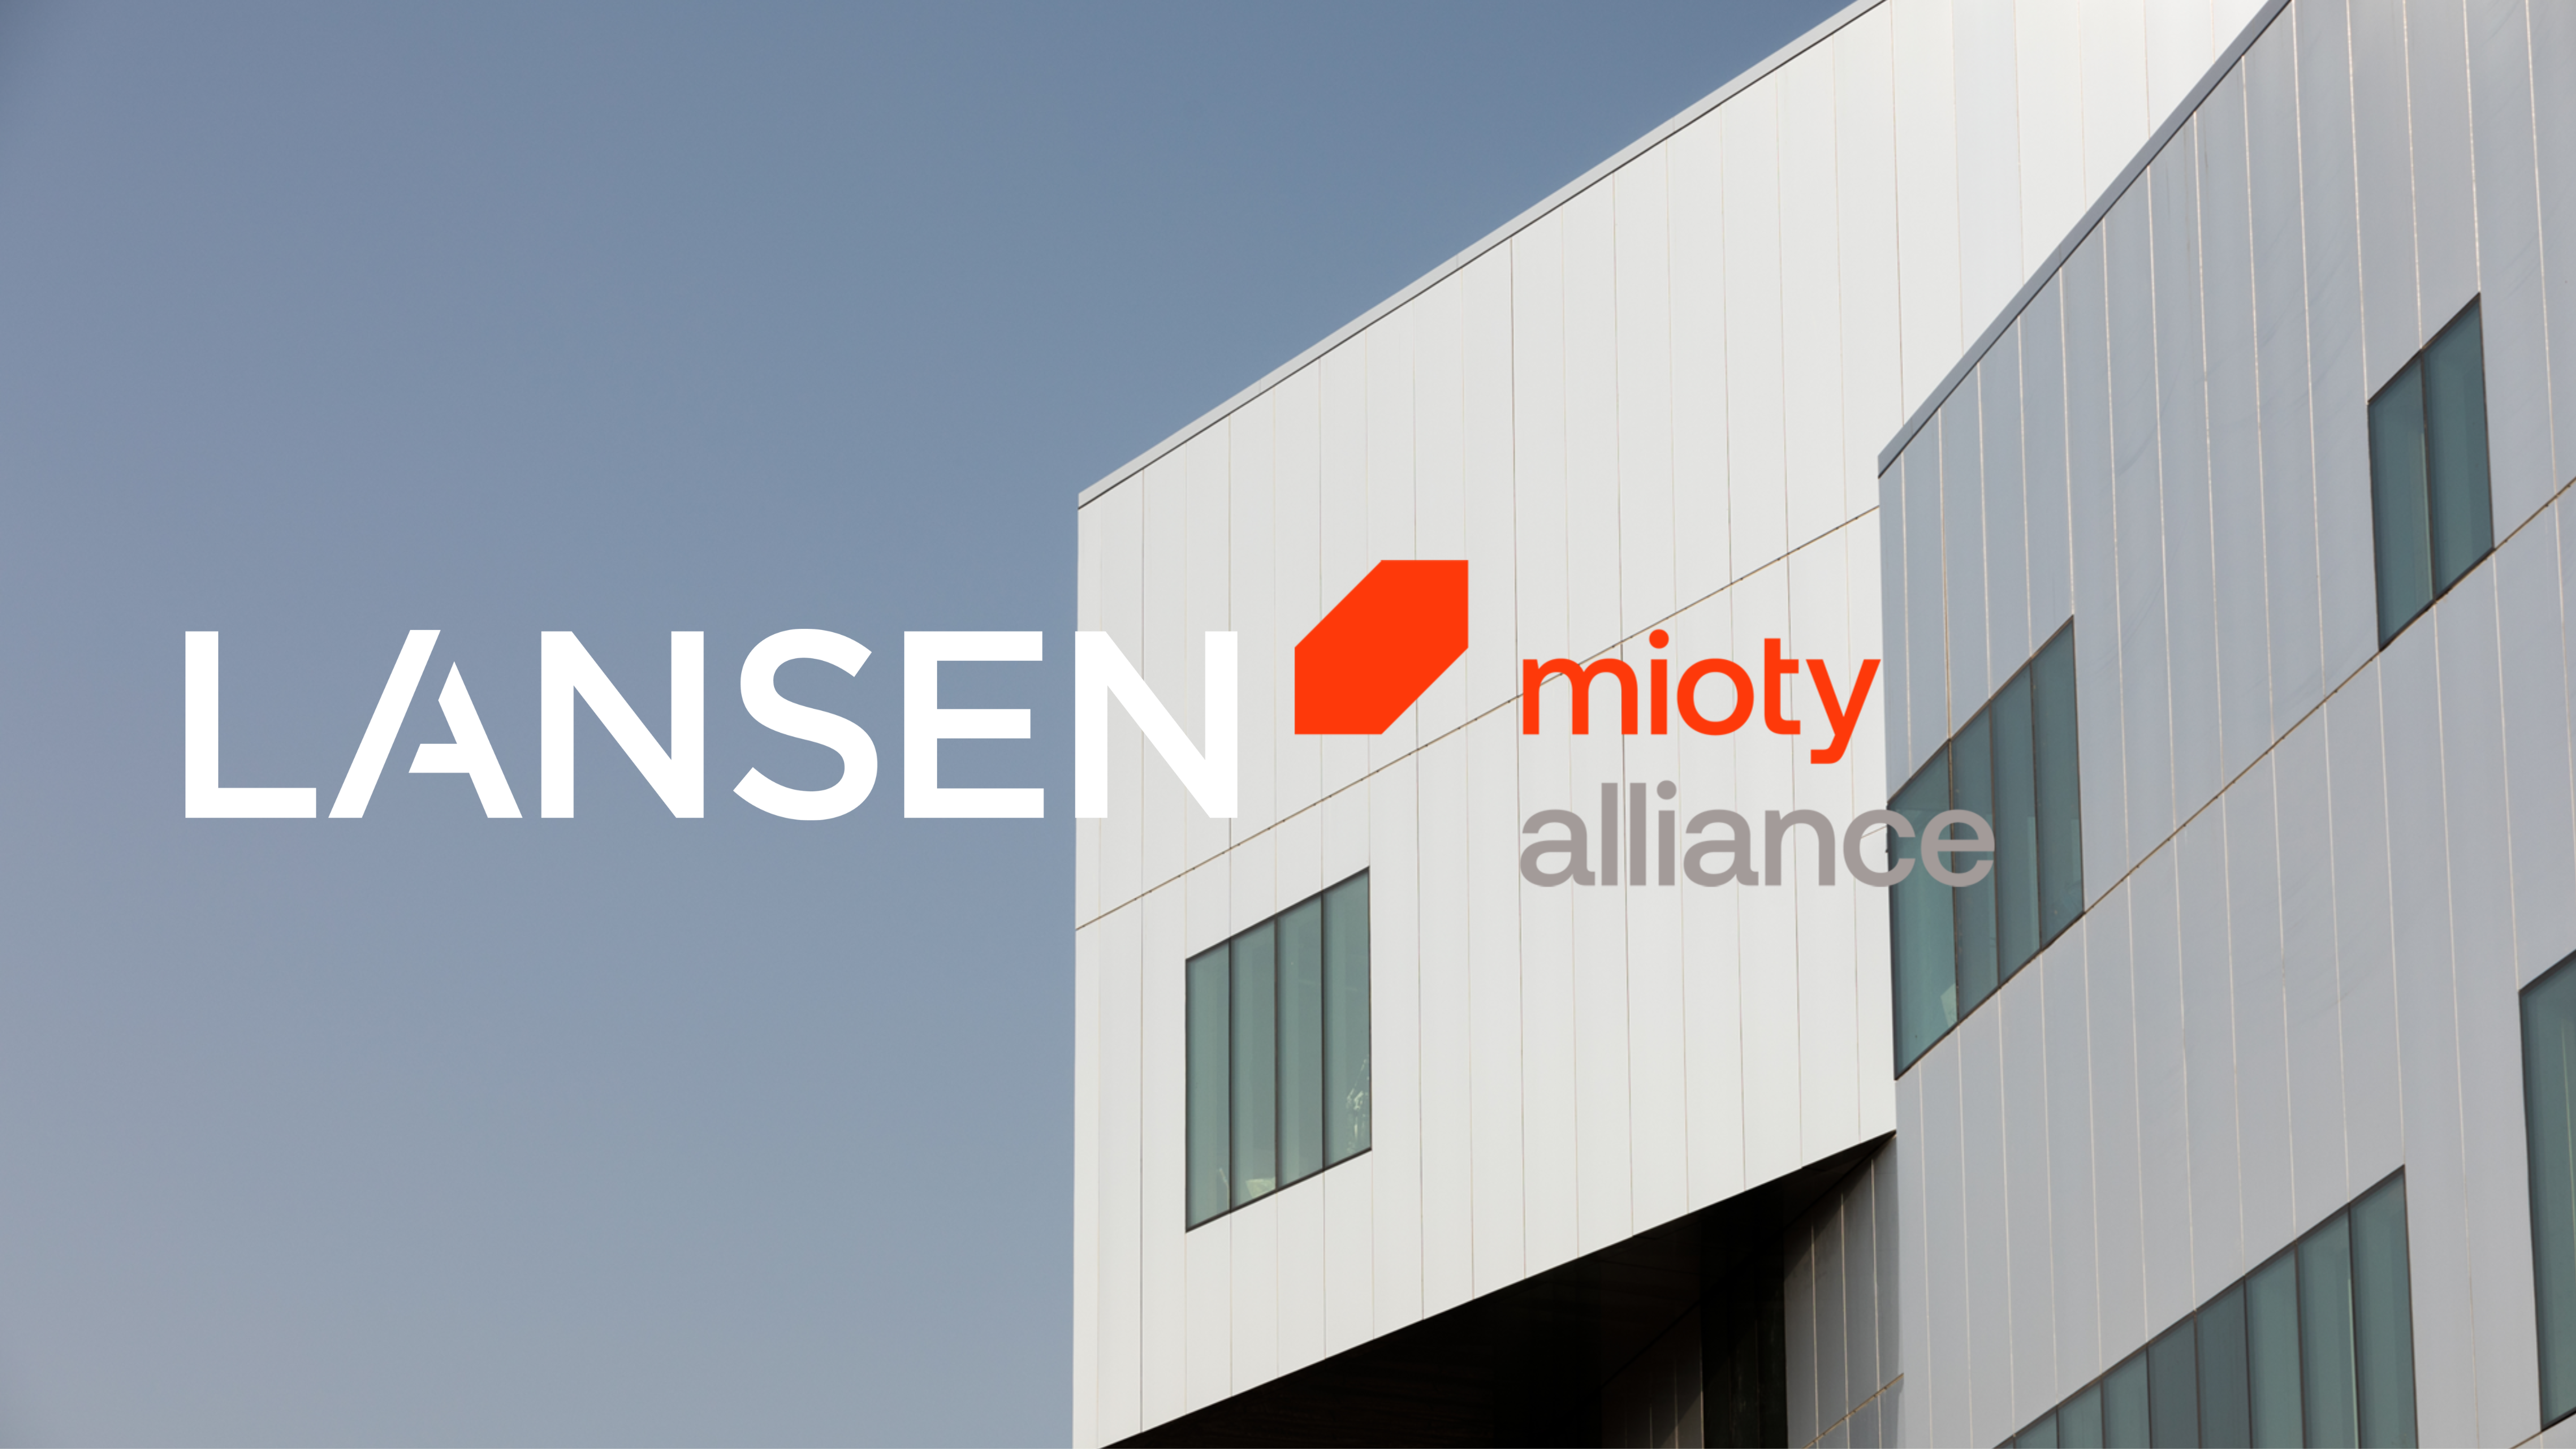 Lansen and mioty alliance banner/poster